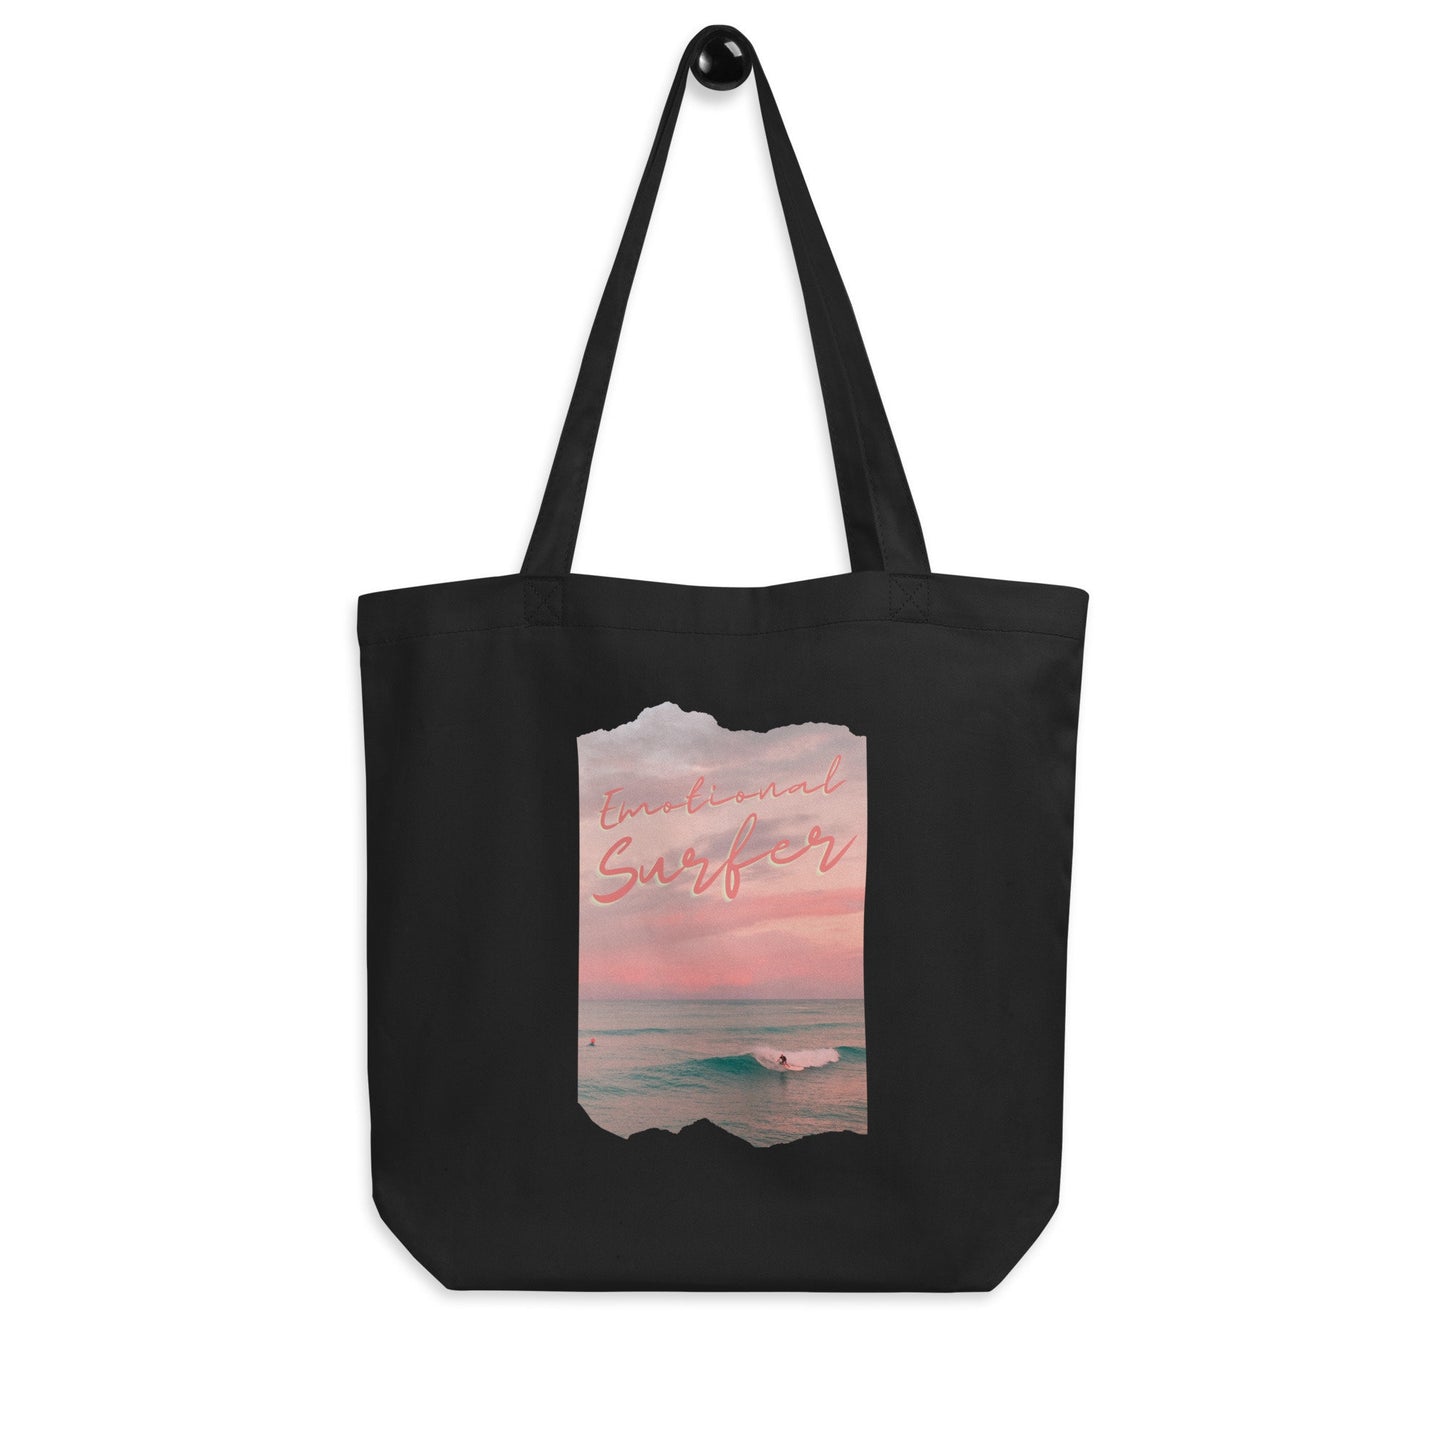 Mental Health Tote Bag &#39;Emotional Surfer&#39;, part of profit donated to Mental Health Charity, Self Care